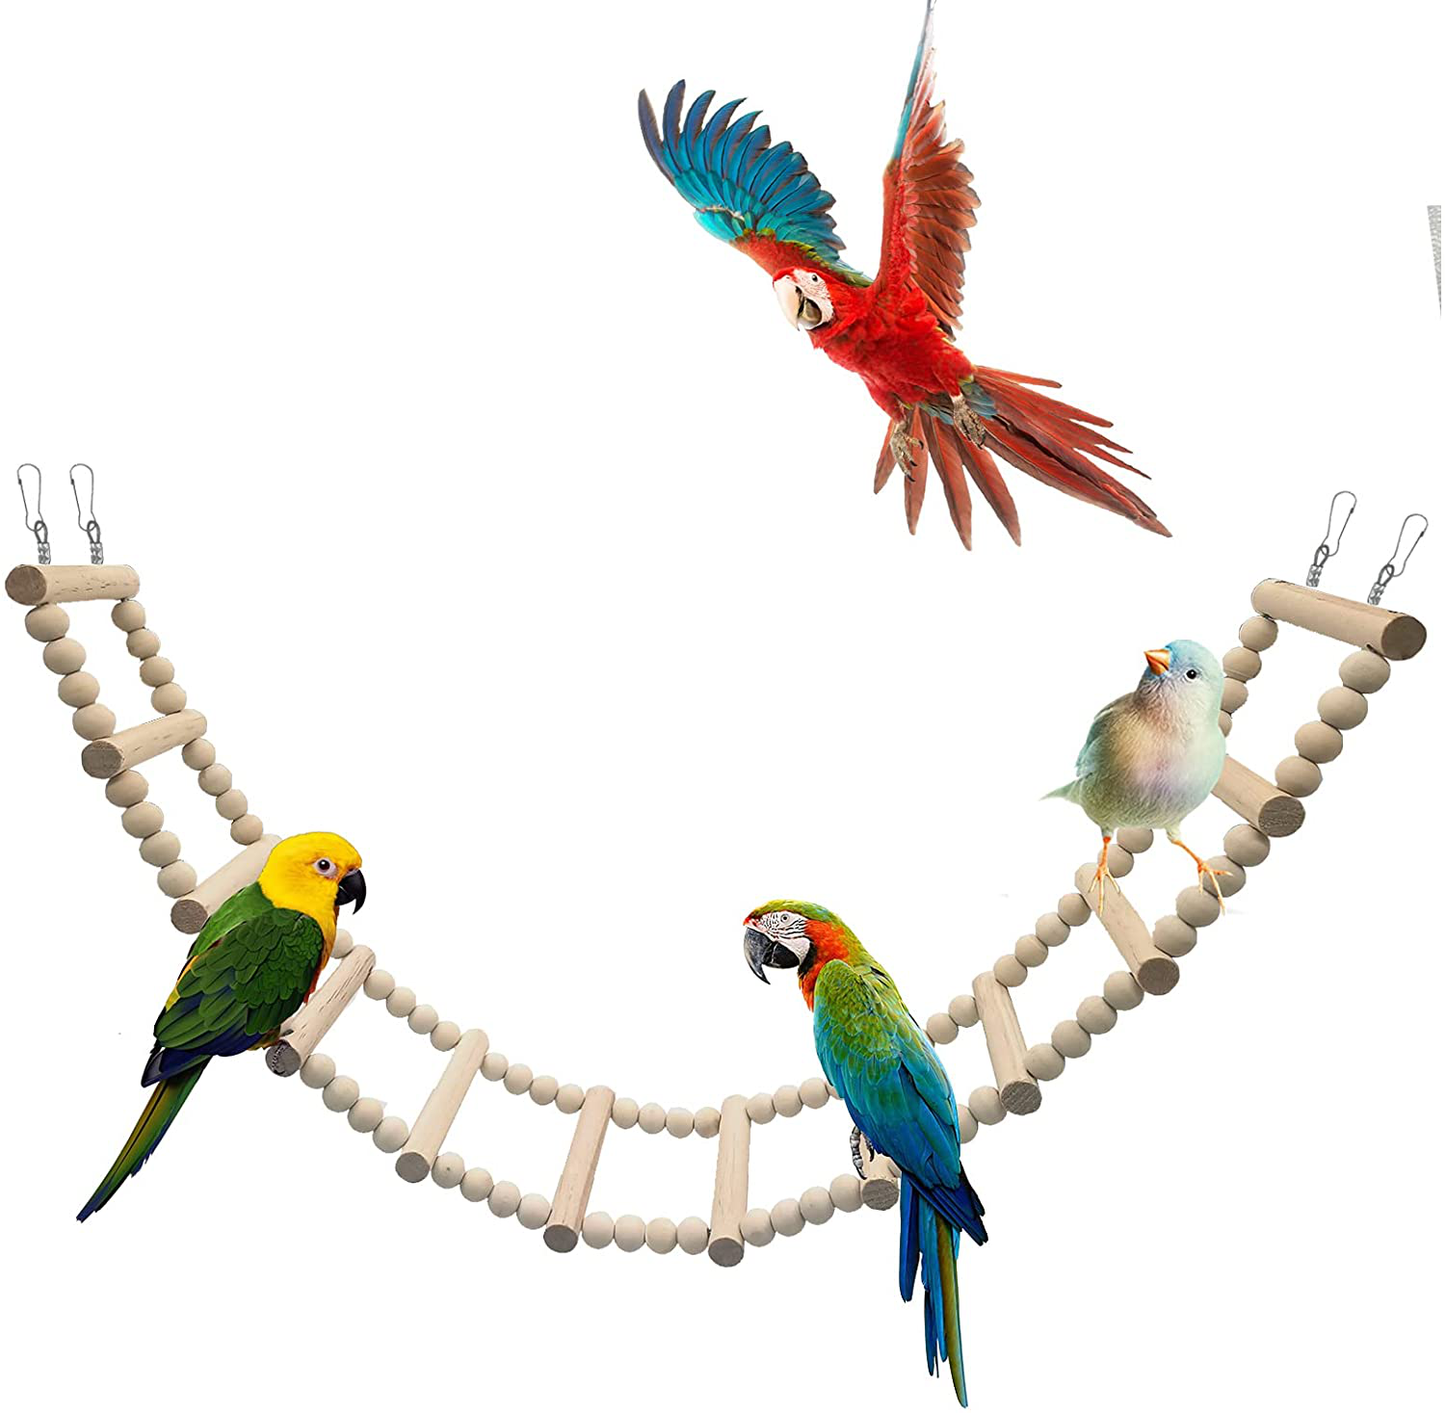 Dnoifne Bird Wooden Ladder Bridge, Ladders Swing Chewing Toys, Hanging Pet Bird Cage Accessories, Funny Perch Training Toys for Bird Parrot Macaw African Budgies Cockatiels Parakeet Hamster Squirrel